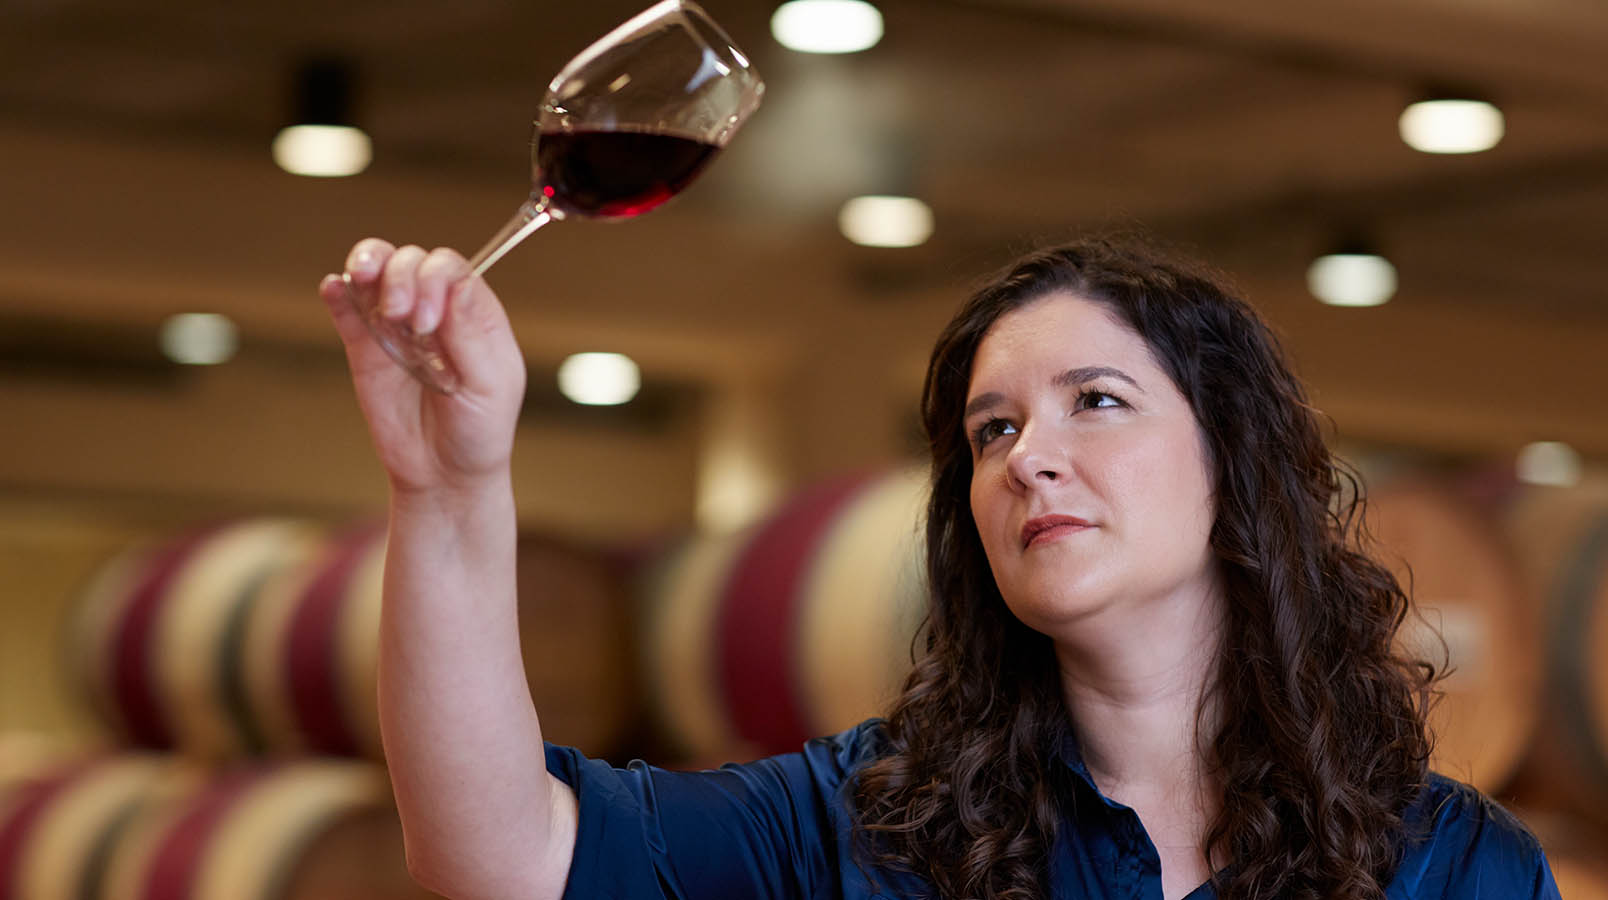 How to become a Winemaker - Salary, Qualifications, Skills